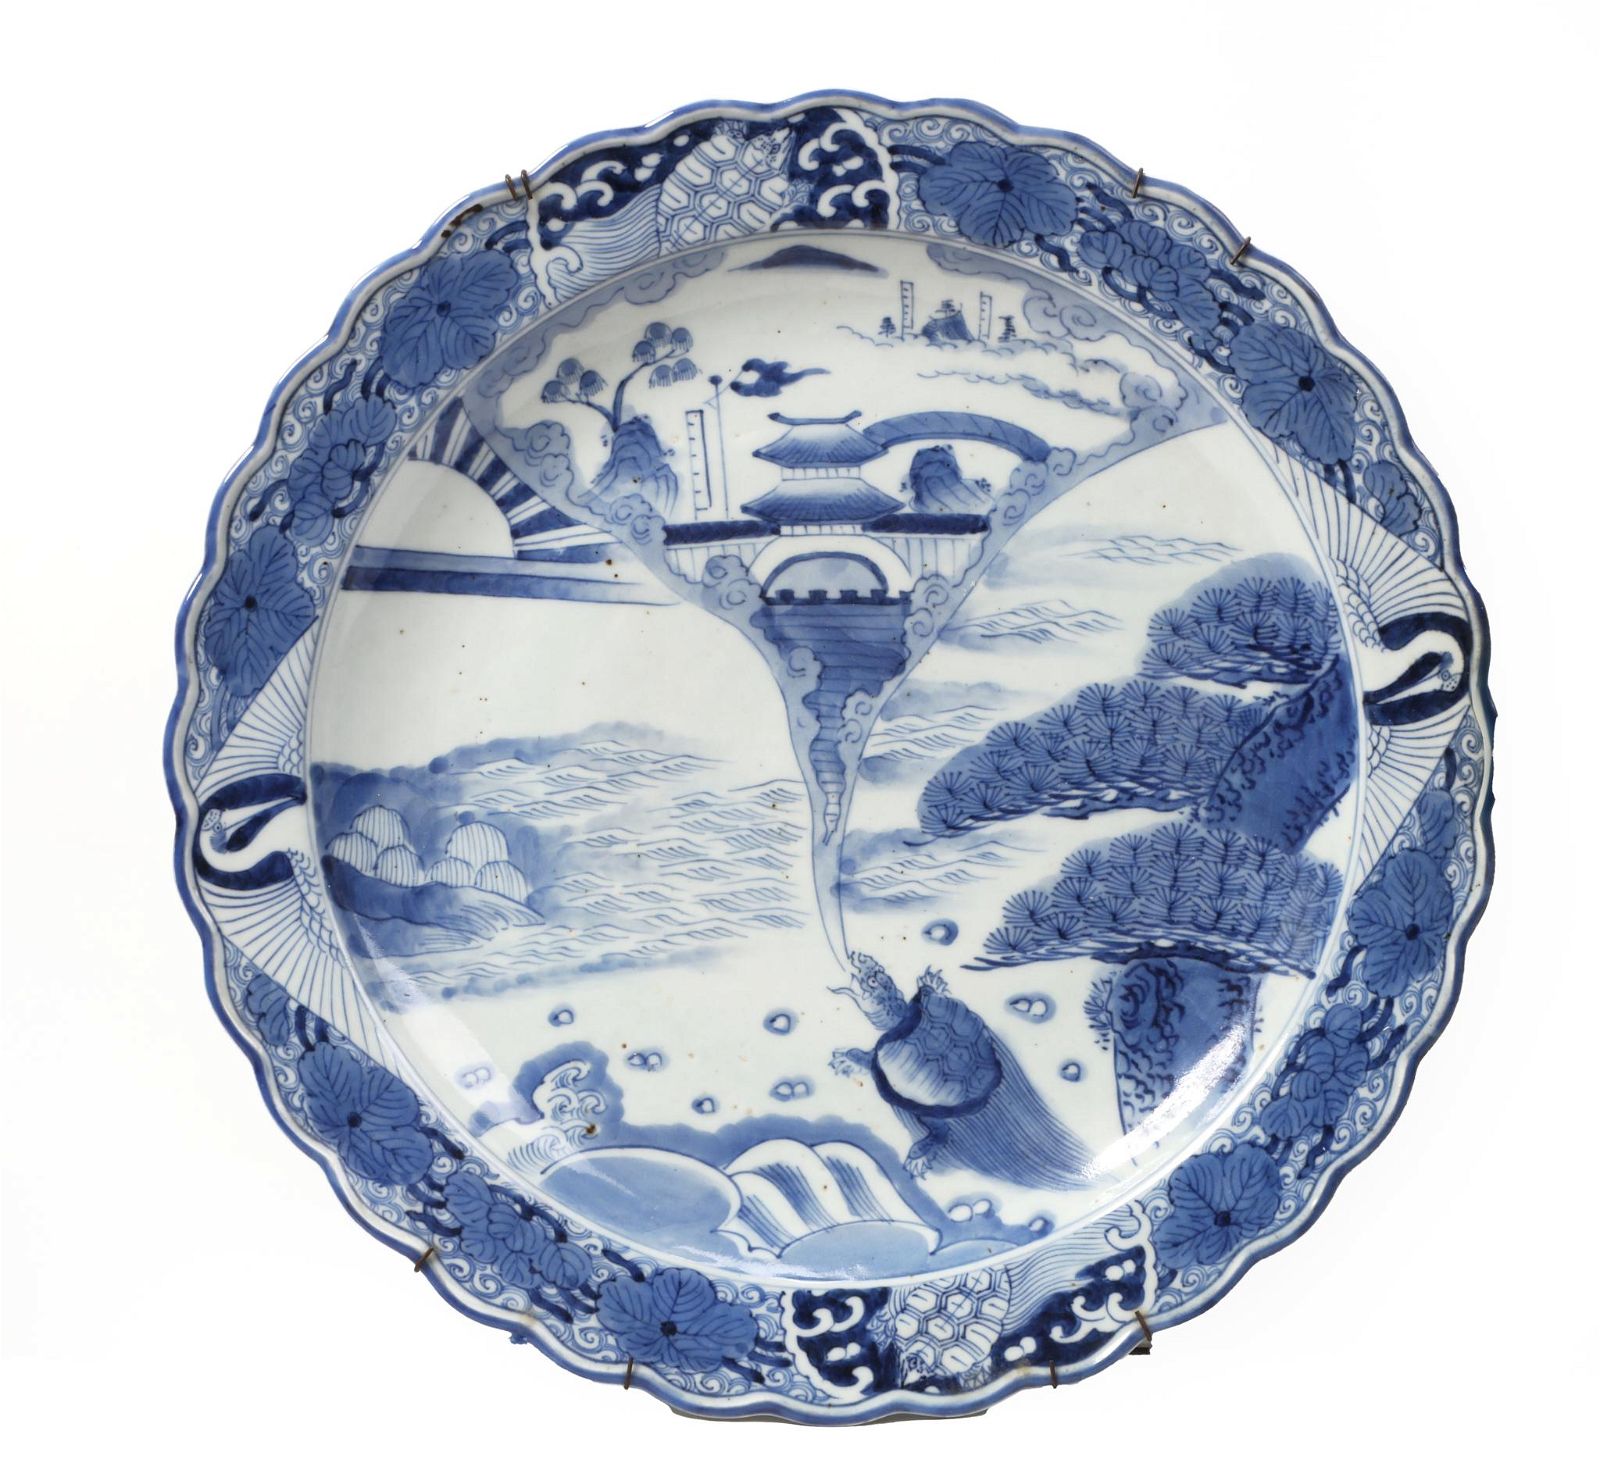 A JAPANESE BLUE AND WHITE PORCELAIN